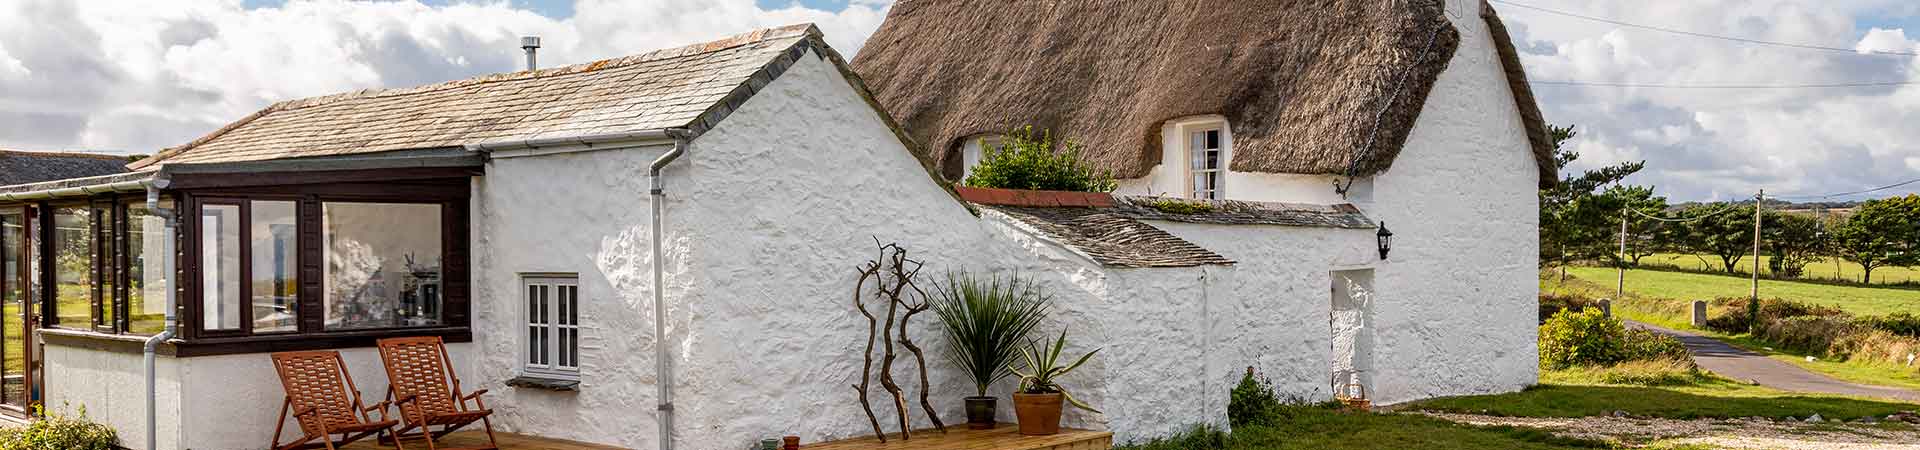 Thatched Holiday Cottages